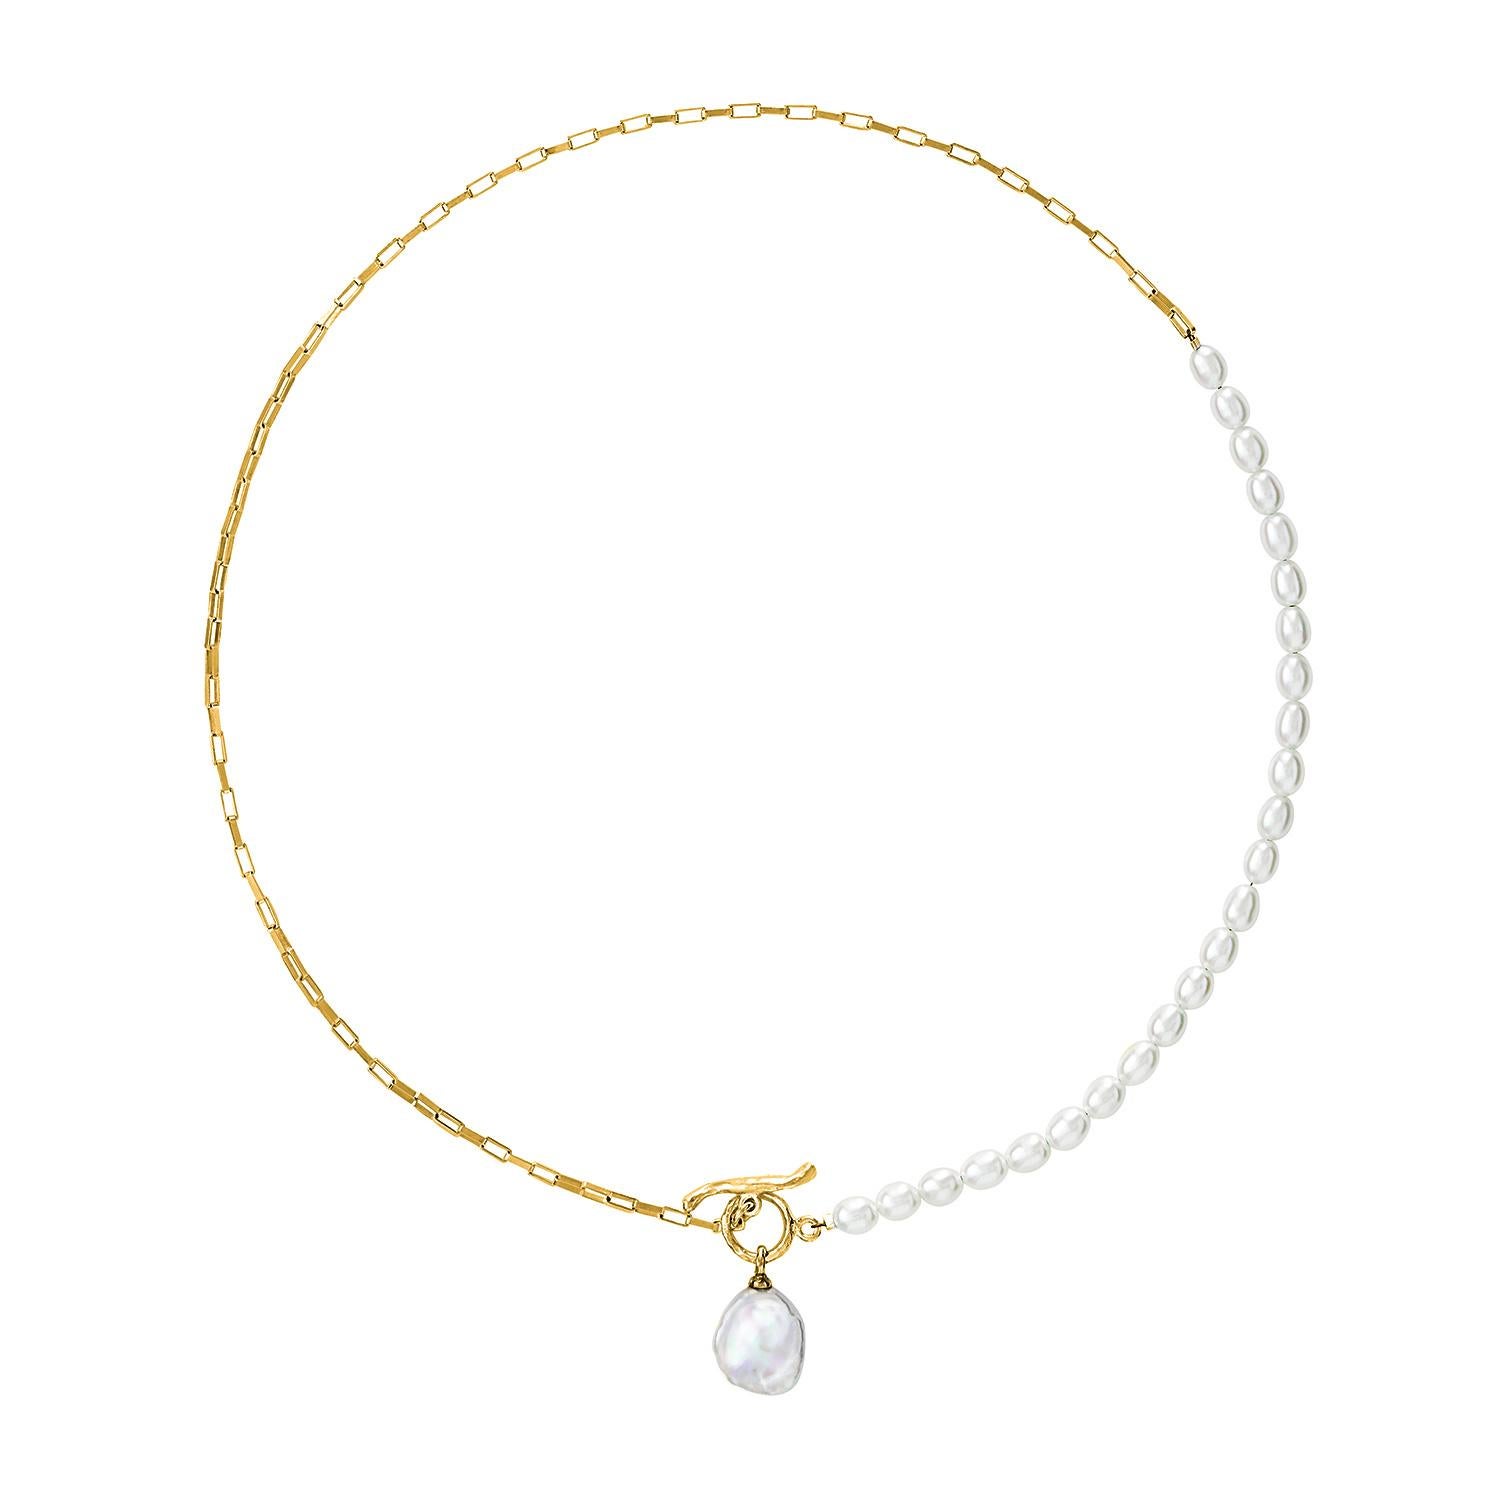 A playful modern take on a classic D&H design, this eclectic Luna Pearl necklace combines 6mm round white freshwater pearls and yellow gold vermeil rectangular link chain to dramatic effect. Accented with a 12 x 10mm keshi pearl drop, the necklace